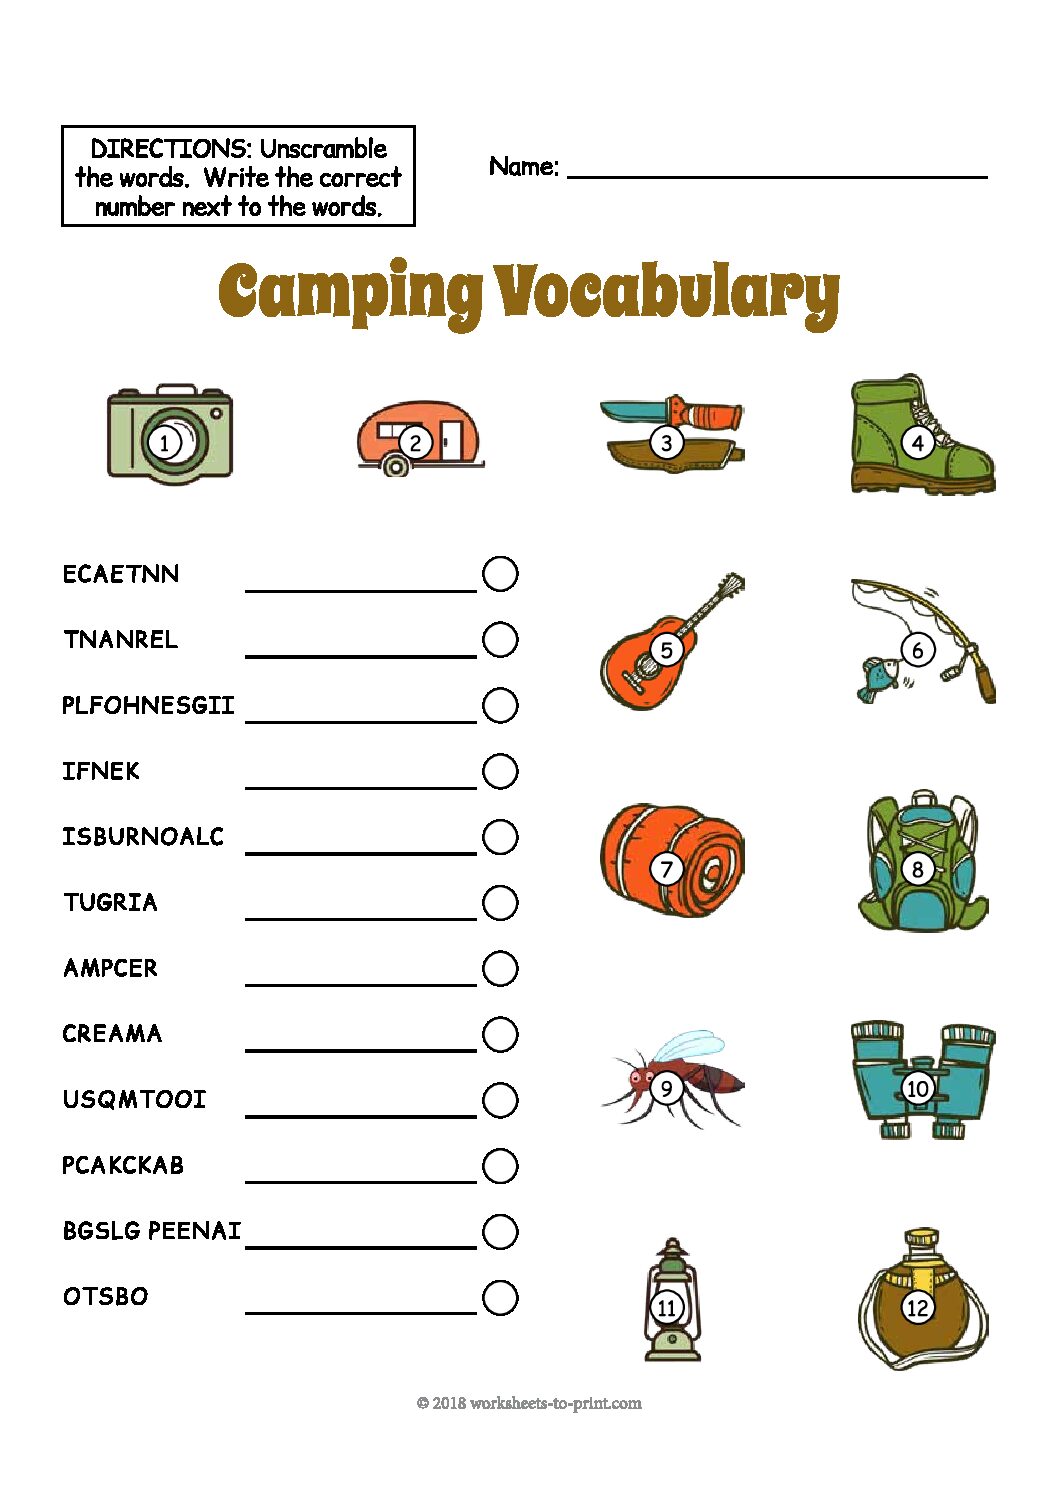 vocabulary-worksheets-printable-and-organized-by-subject-k5-learning-free-vocabulary